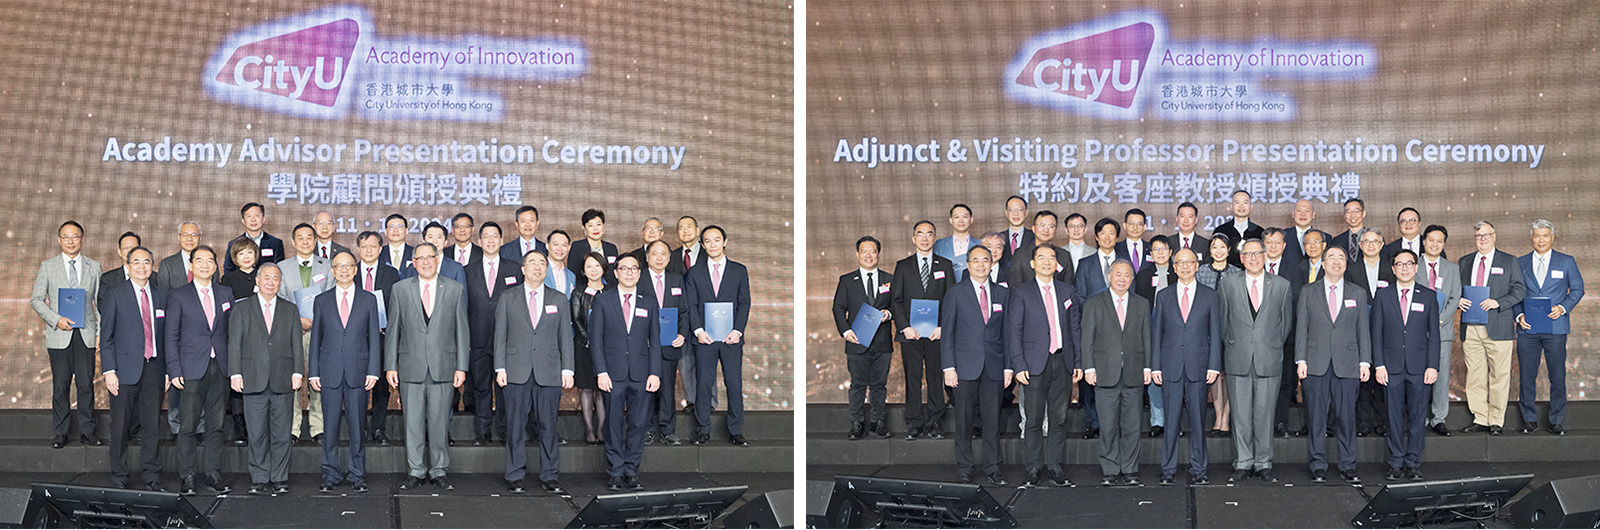 CAI Academy Advisors, Adjunct and Visiting Professors were appointed at the ceremony.